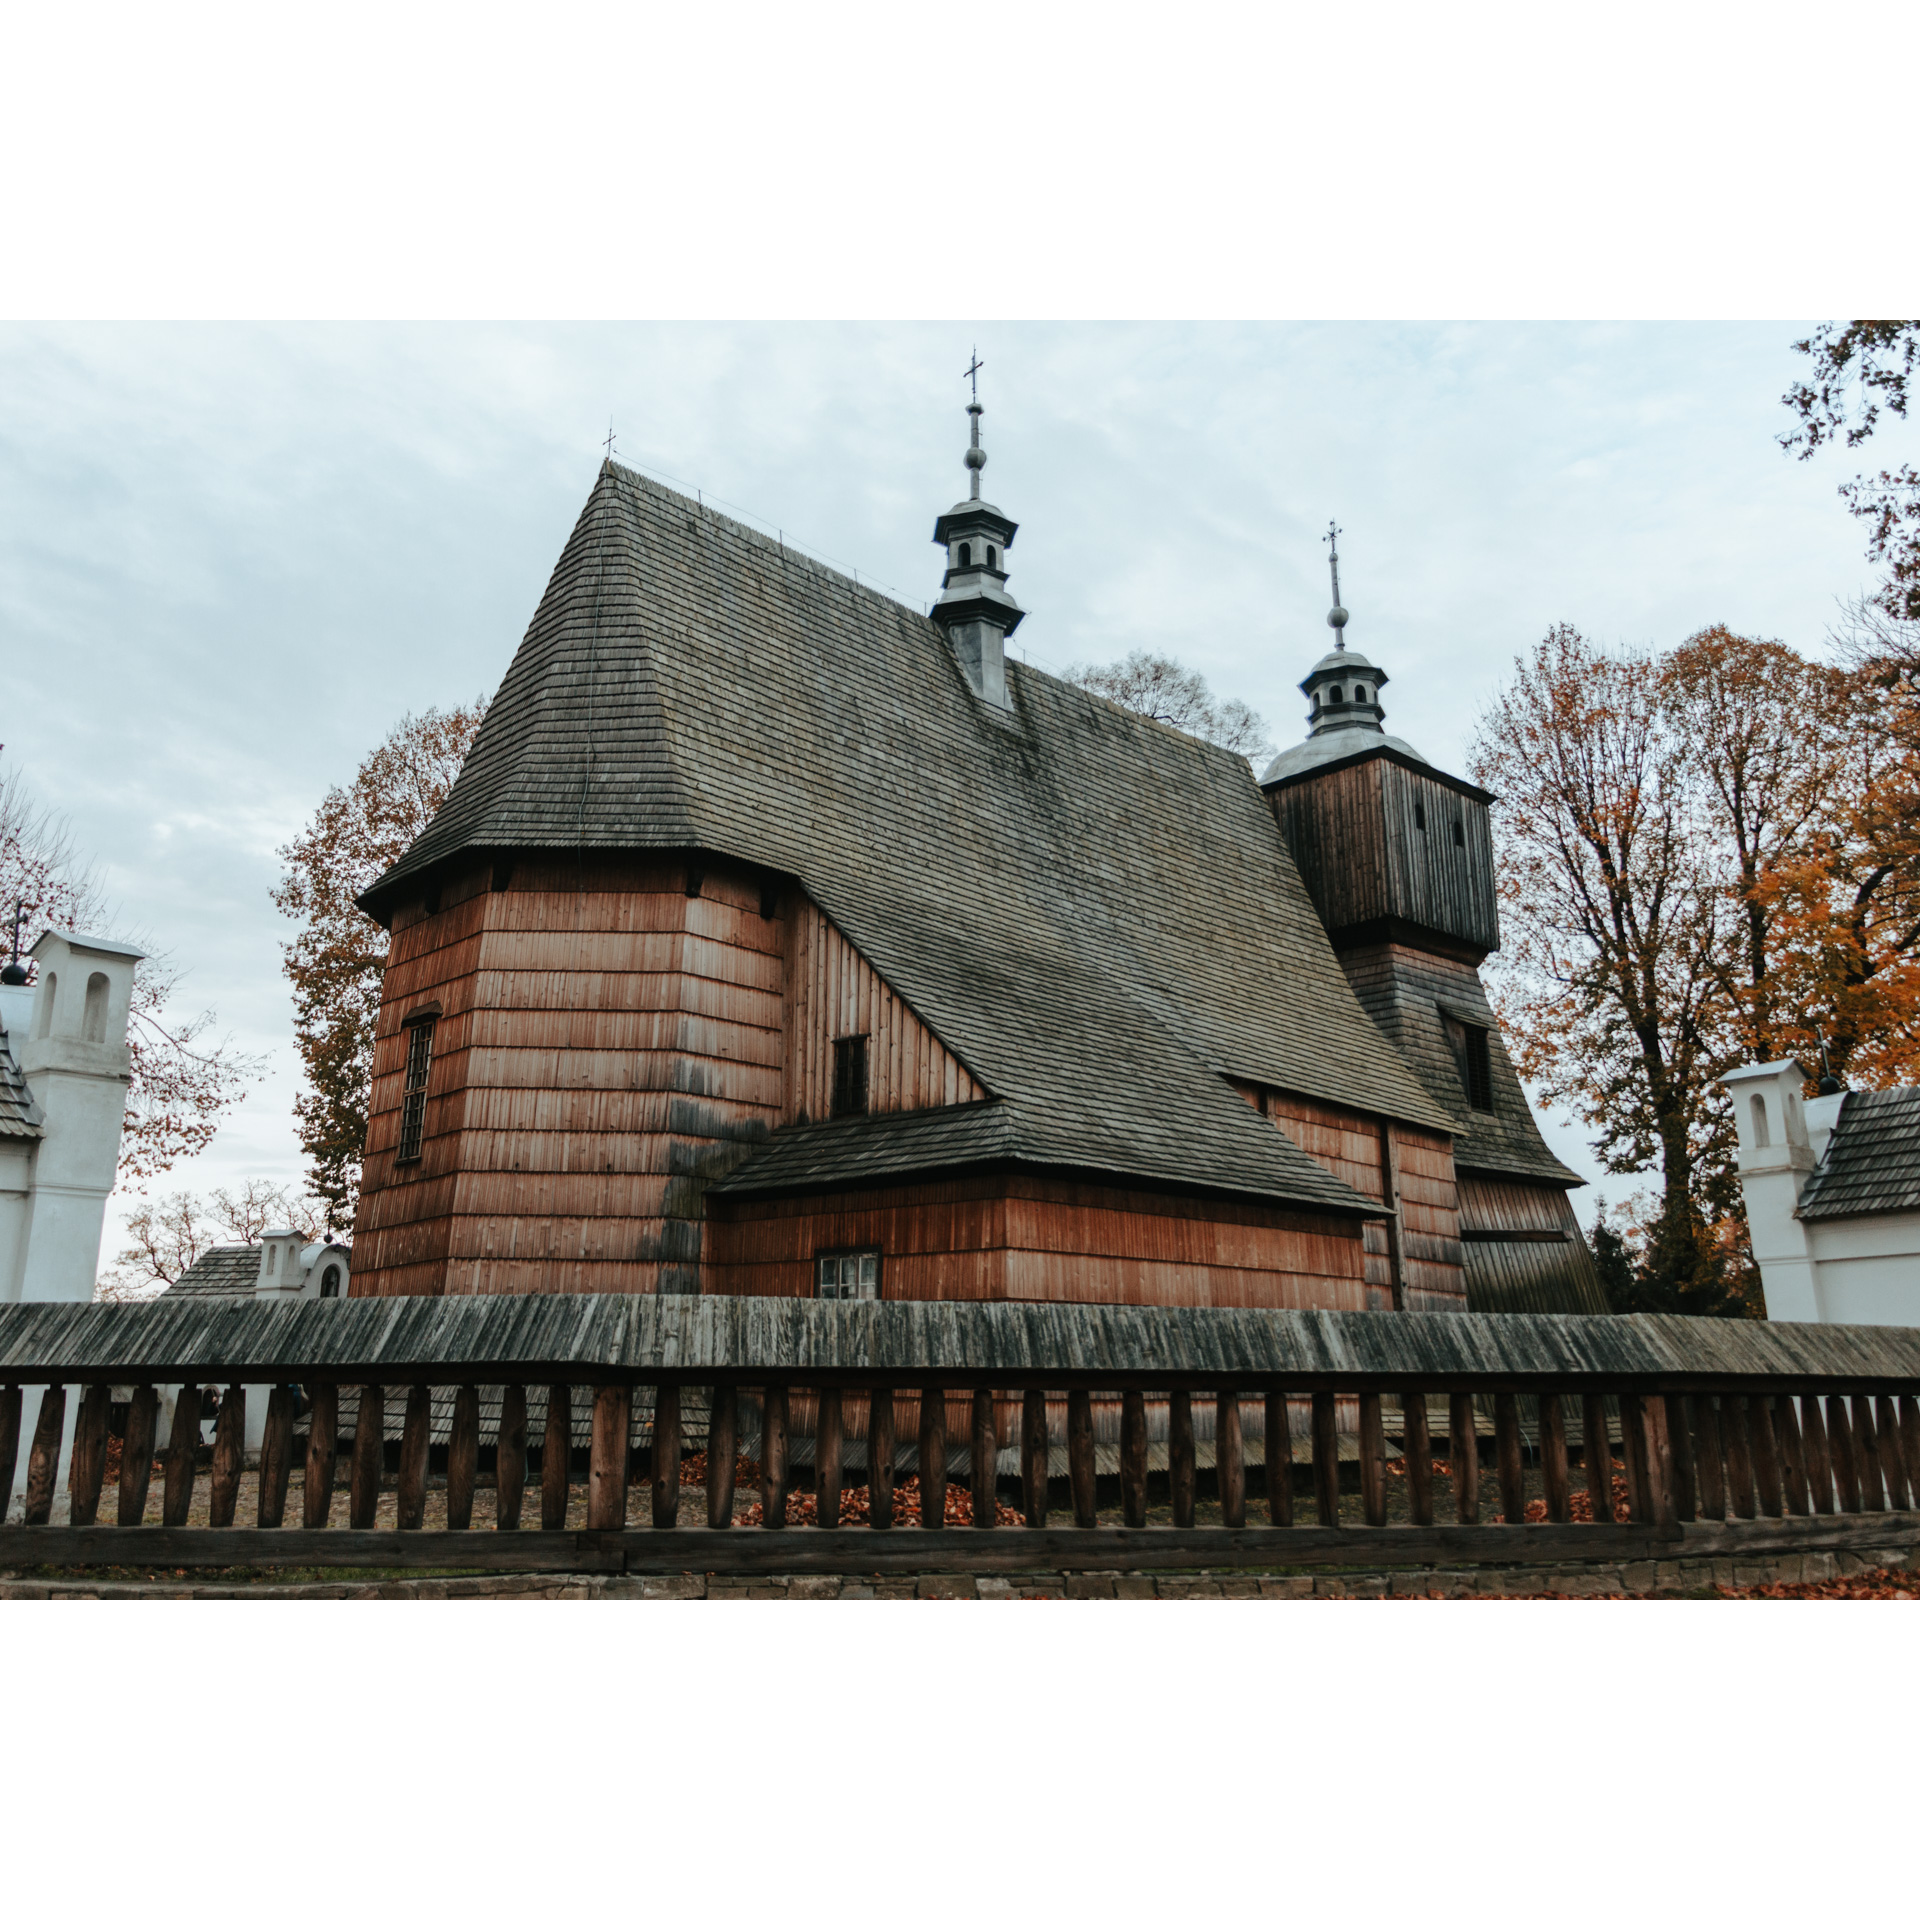 A wooden Orthodox church surrounded by a wooden fence against the background of autumn trees